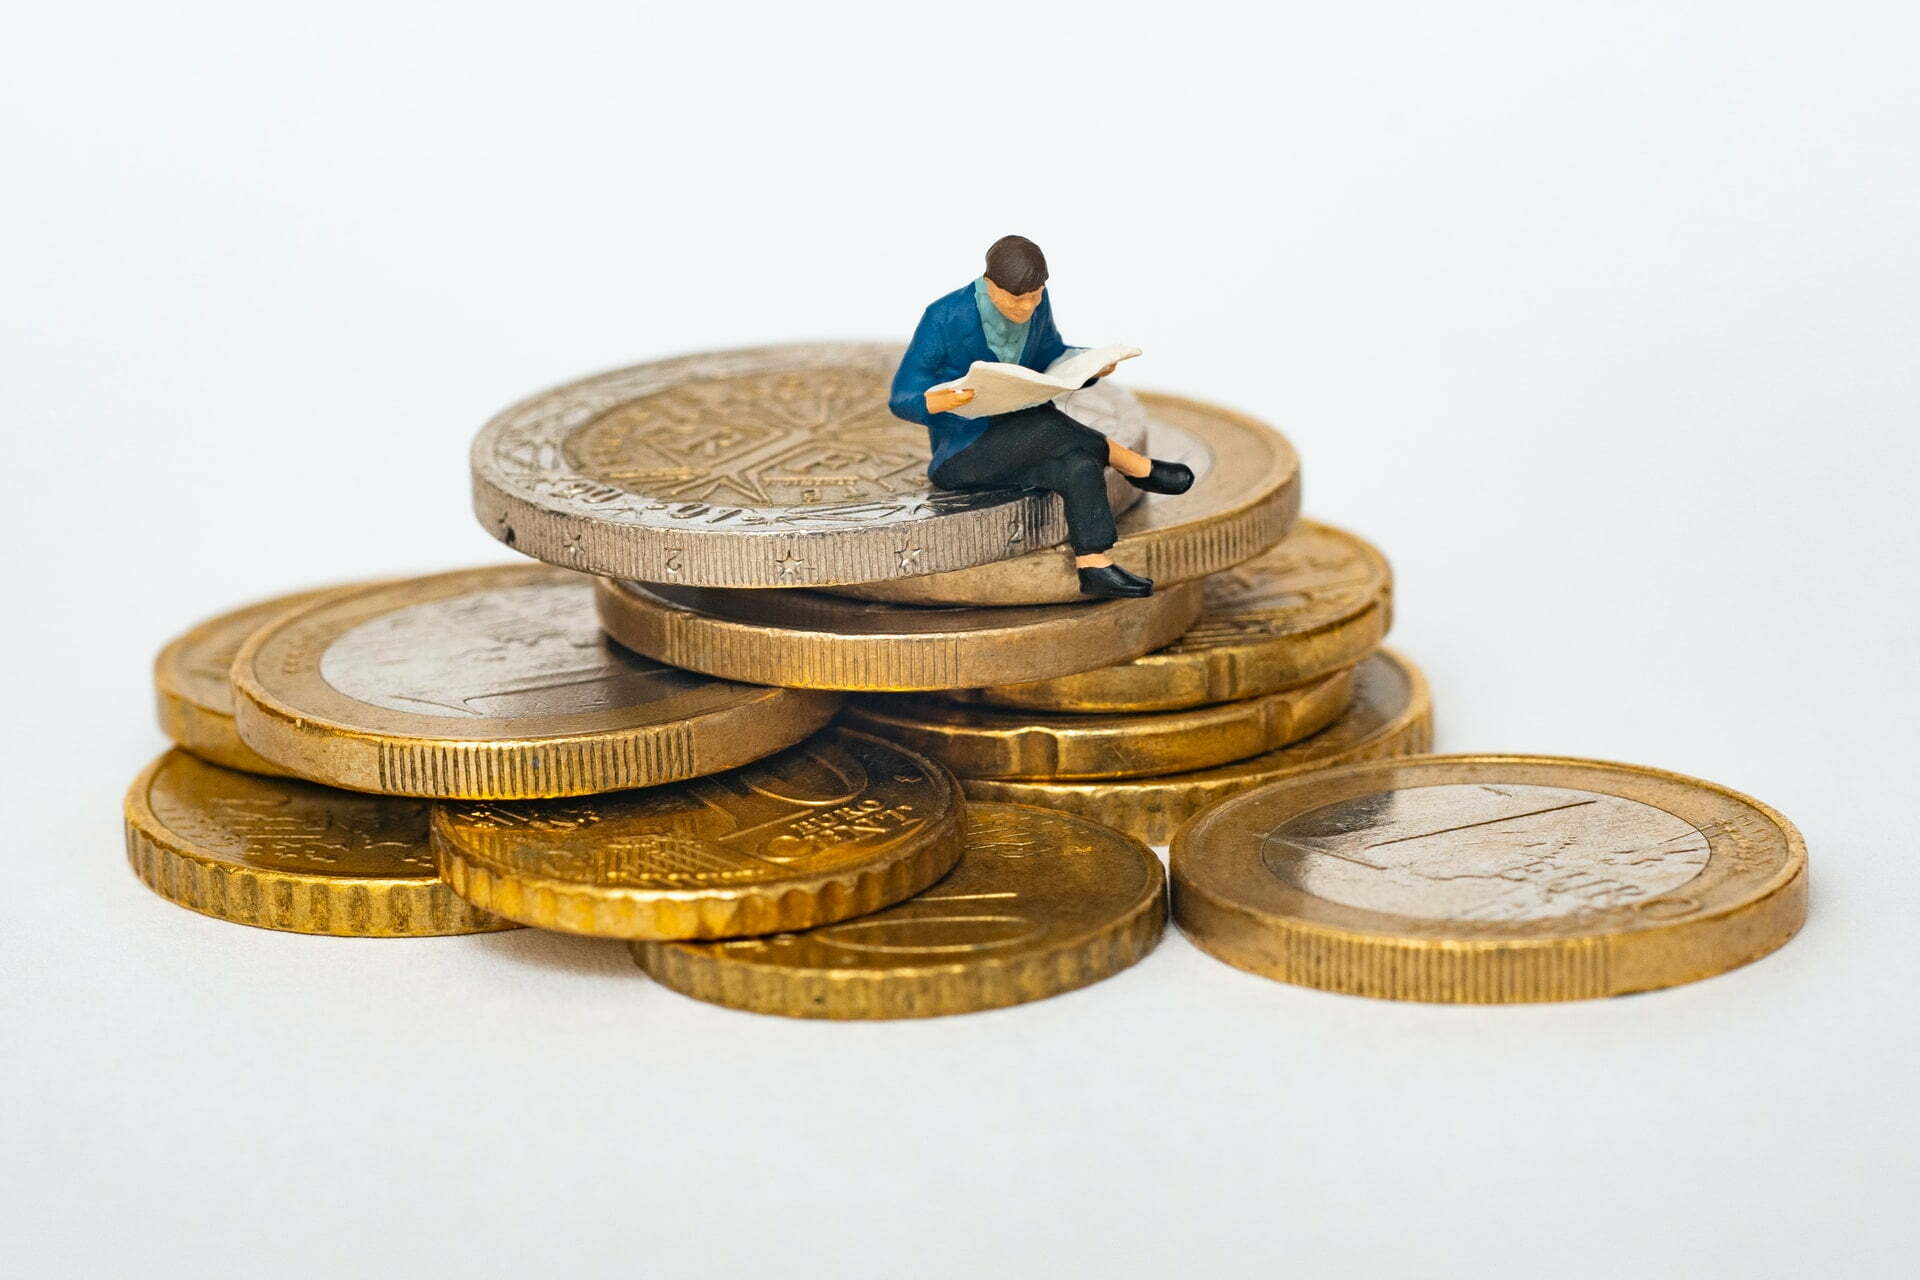 a person sitting on a pile of coins